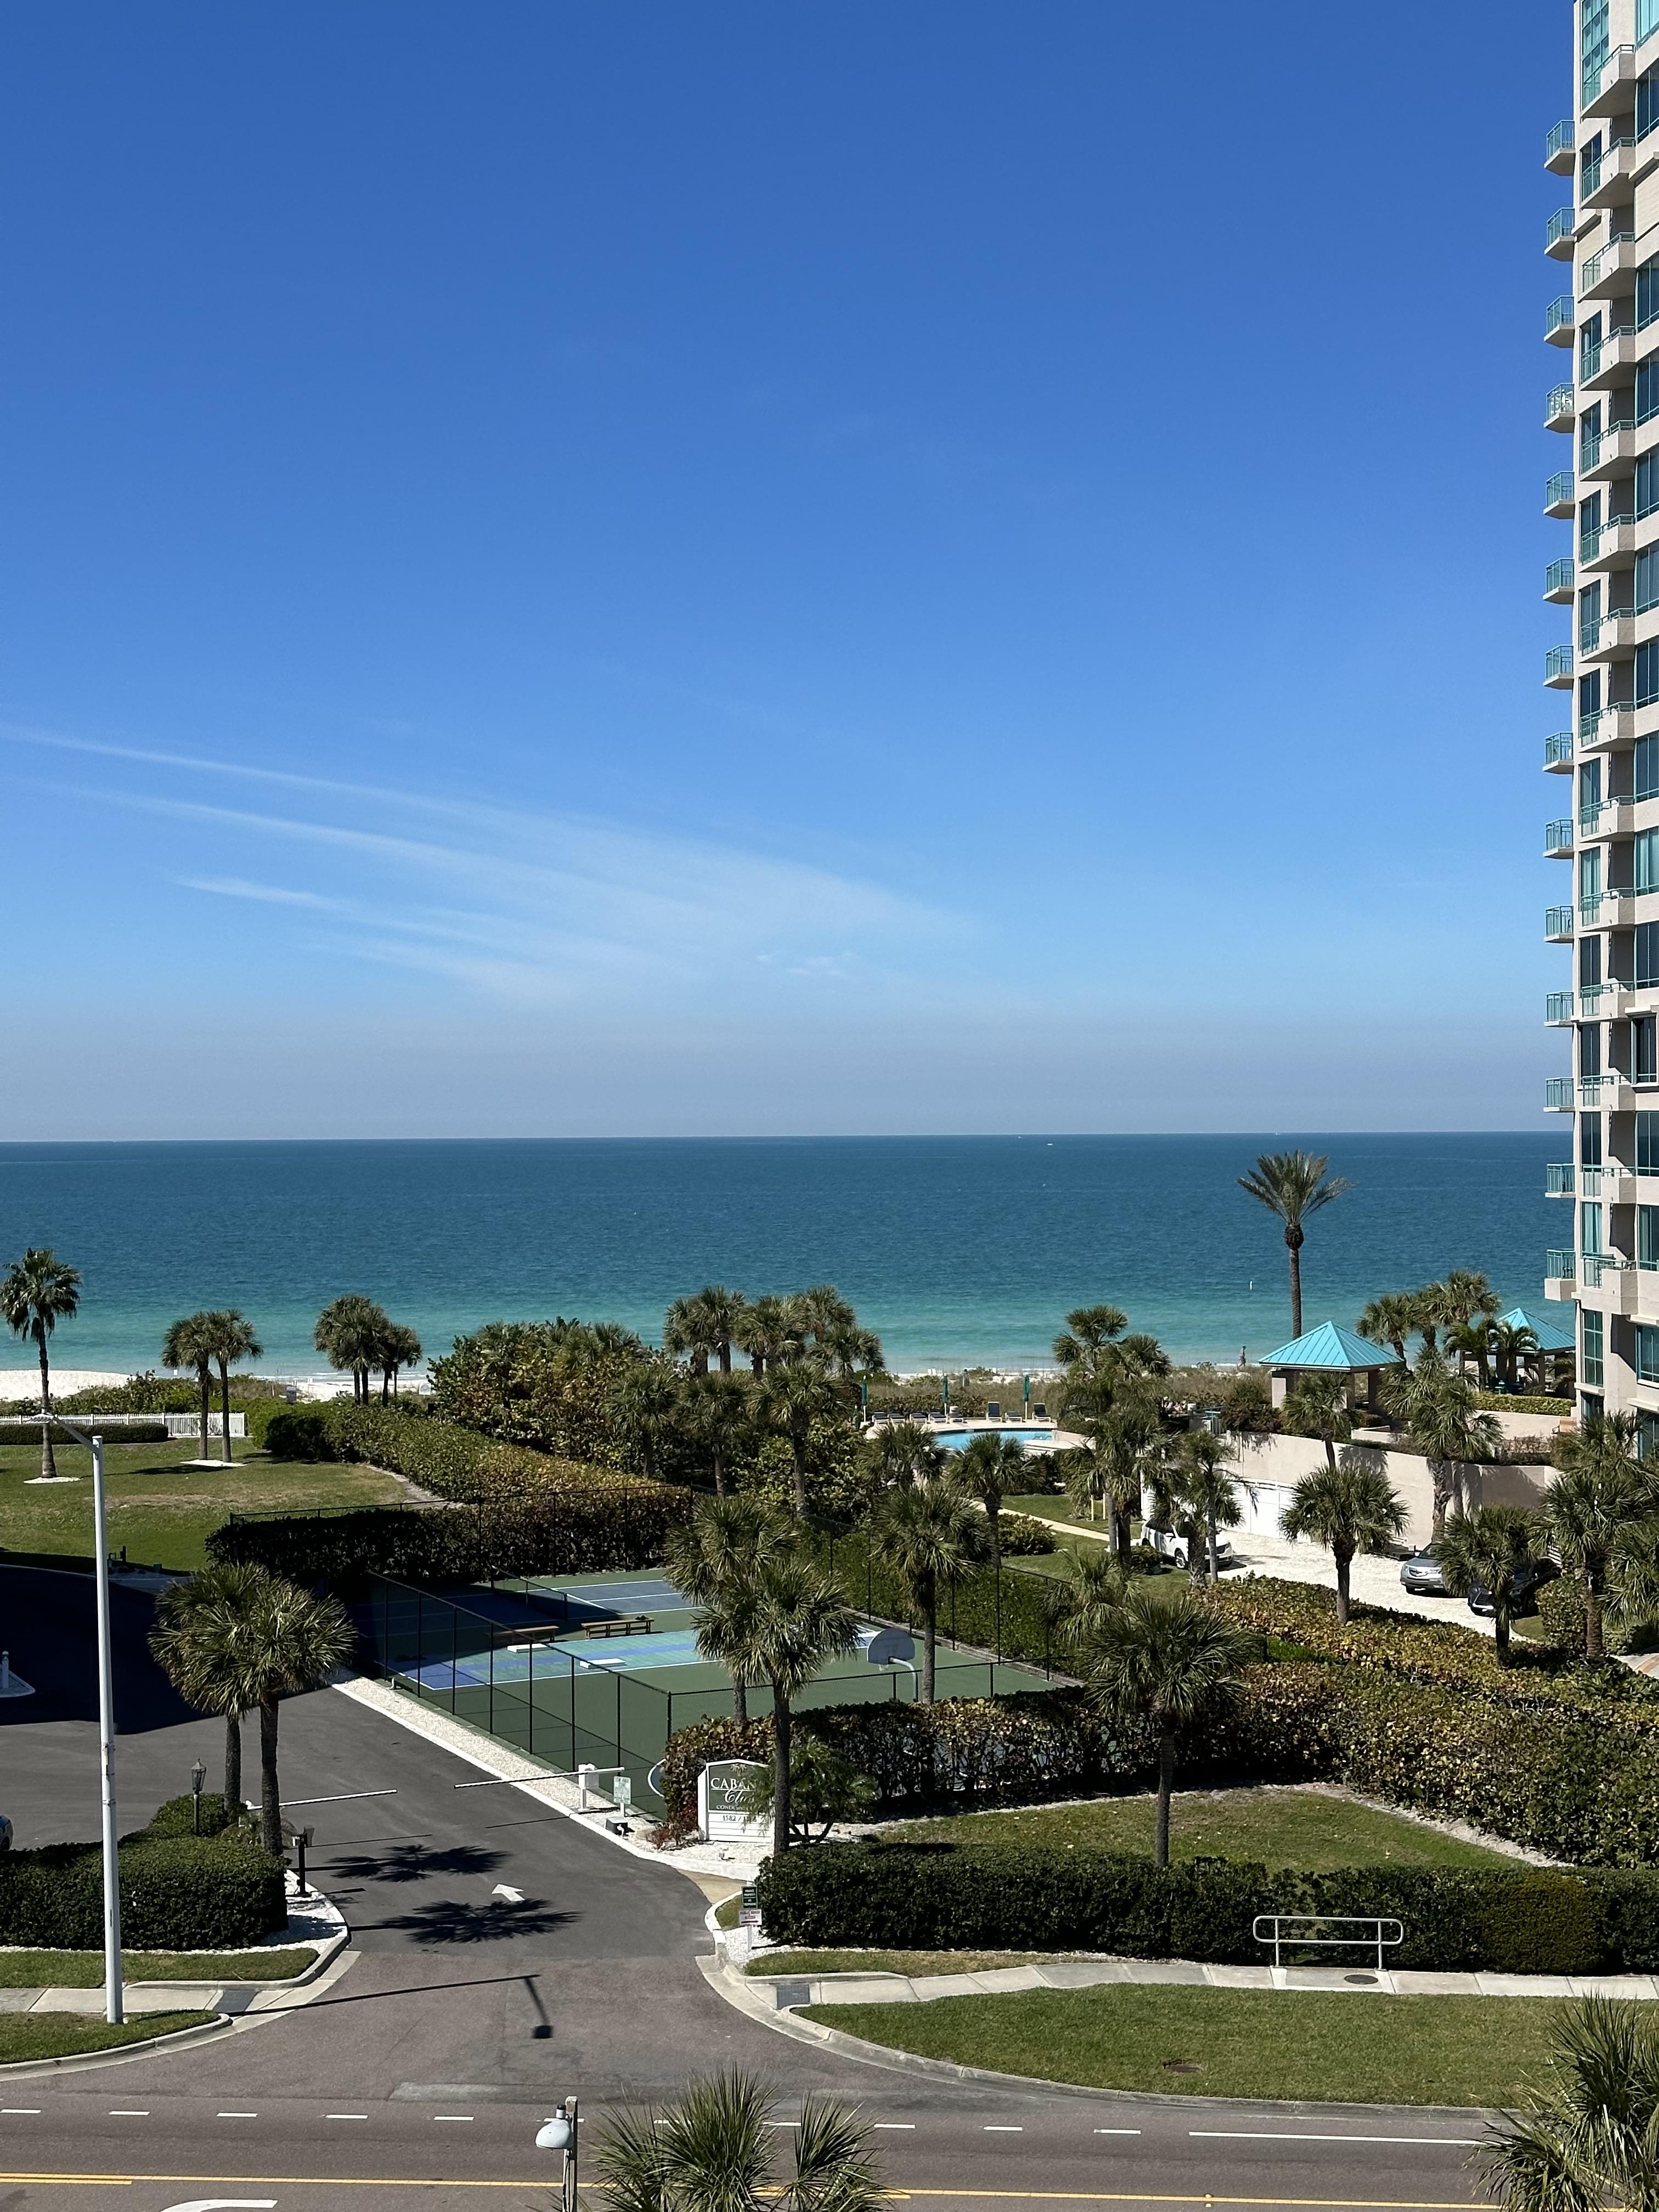 Property Image for 1581 Gulf Blvd # 505